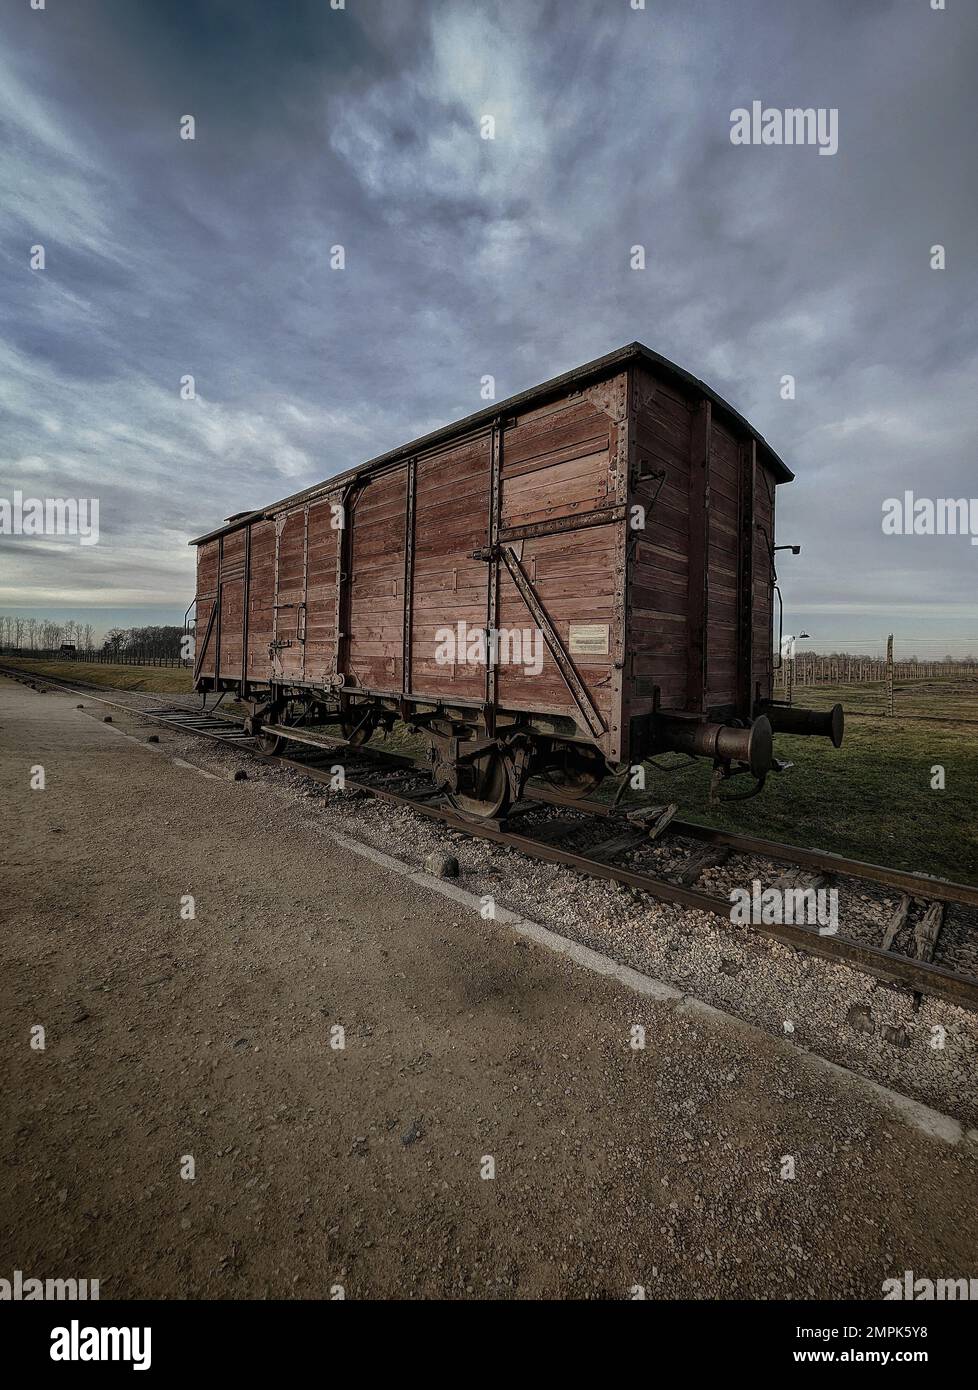 A vertical shot of a wooden wagon used for transporting the prisoners in Auschwitz, Poland Stock Photo